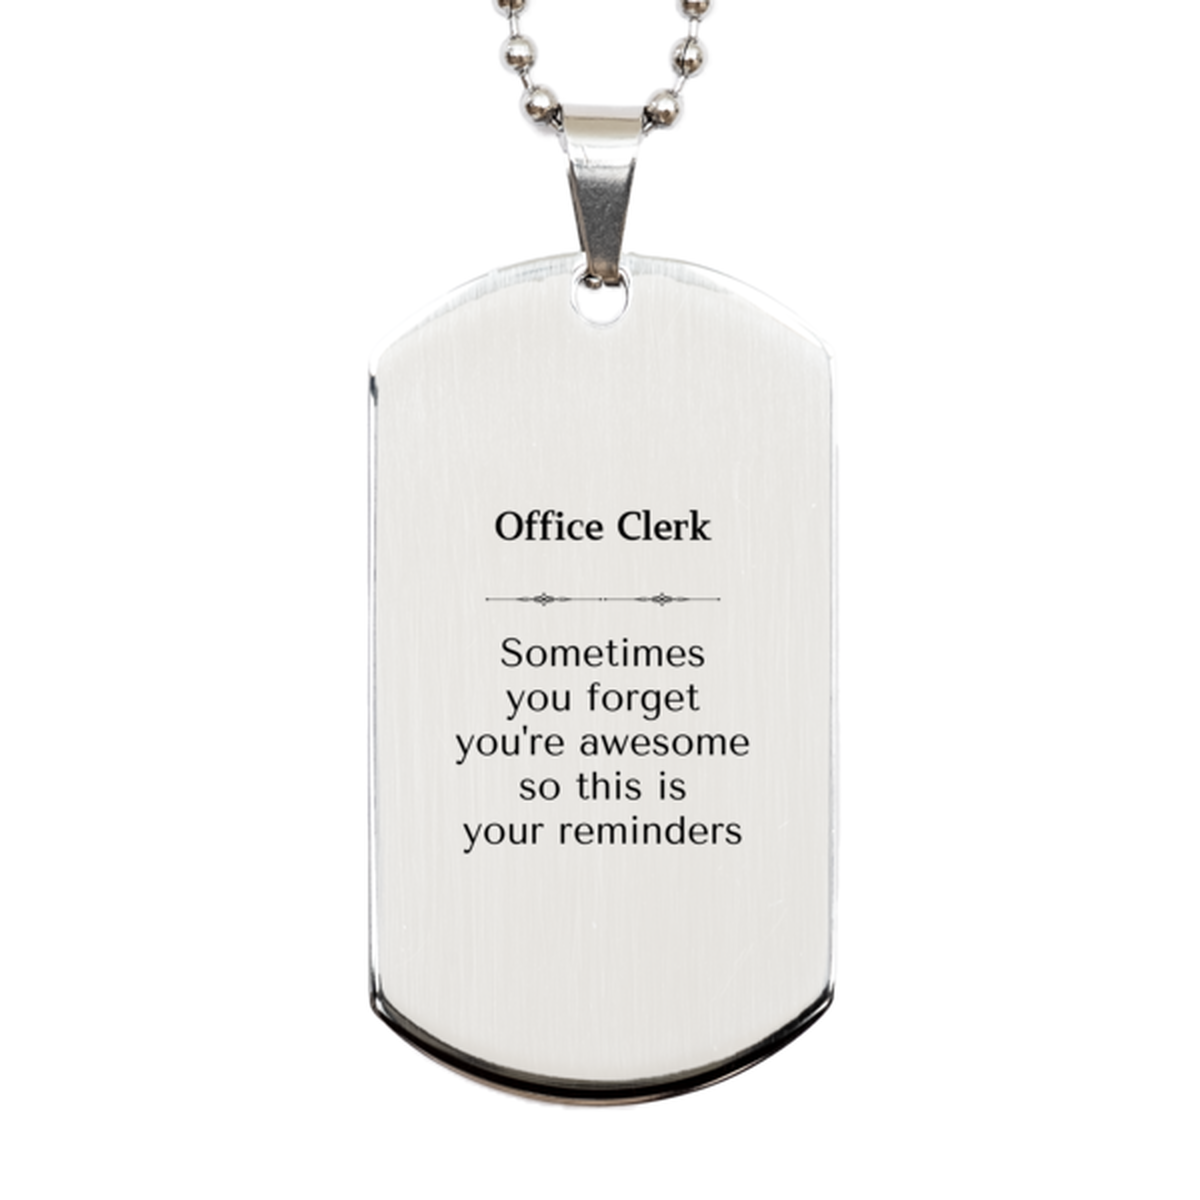 Sentimental Office Clerk Silver Dog Tag, Office Clerk Sometimes you forget you're awesome so this is your reminders, Graduation Christmas Birthday Gifts for Office Clerk, Men, Women, Coworkers